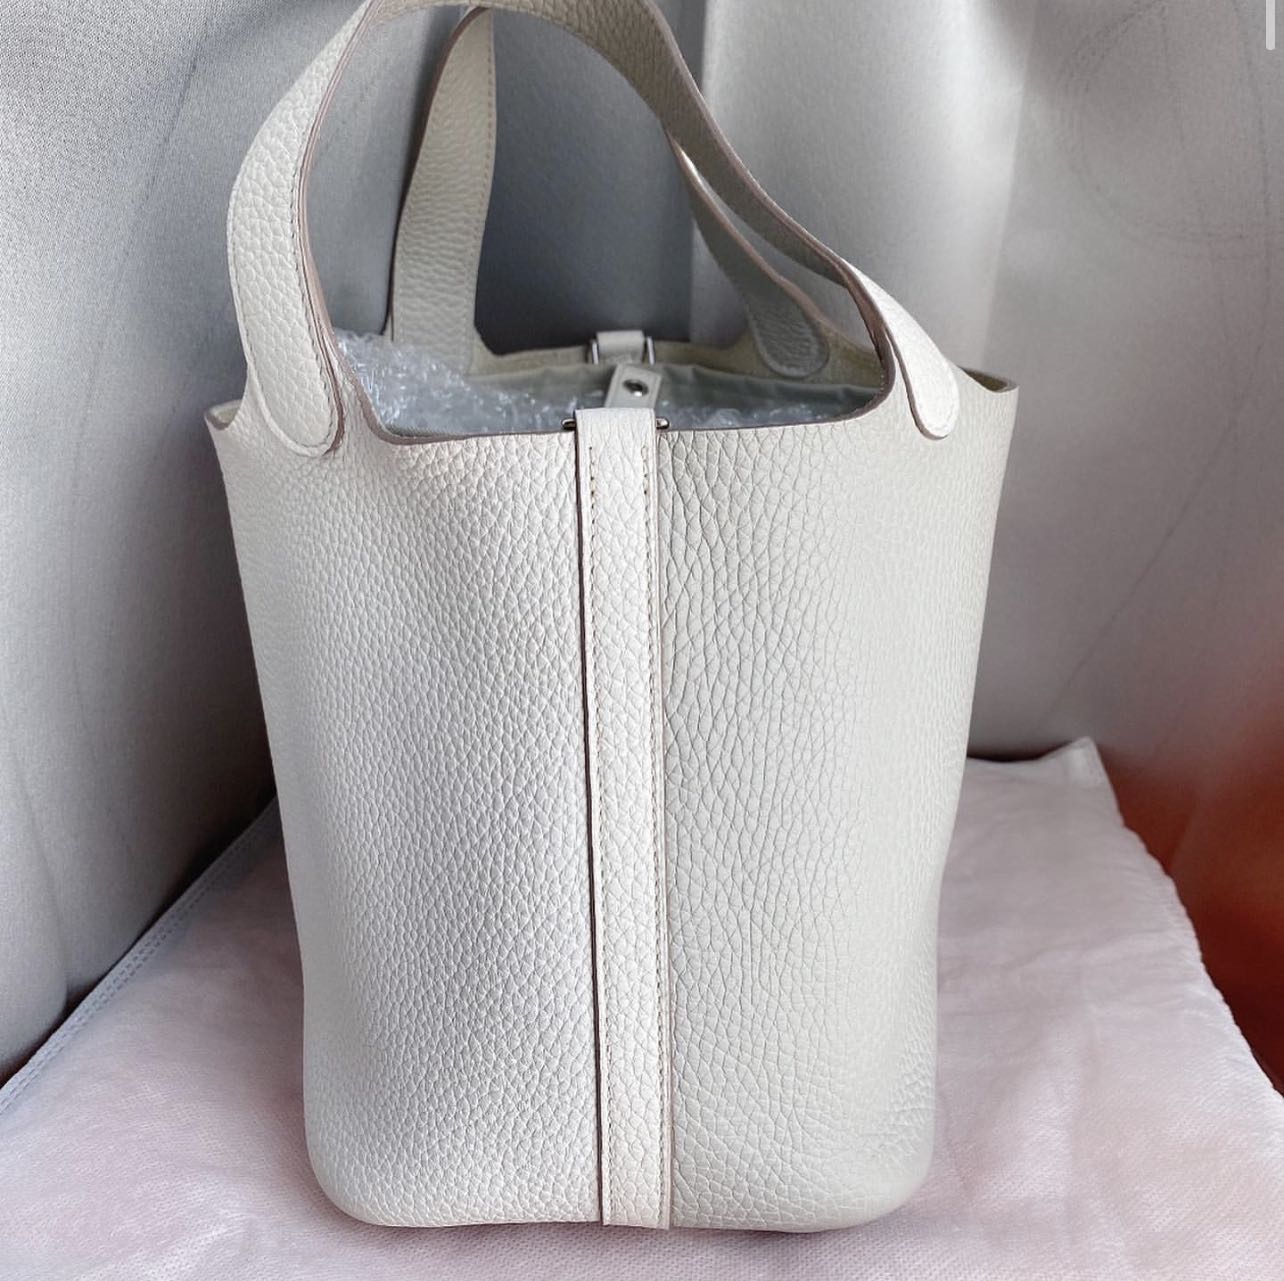 New Hermes Picotin Lock PM 18 Bag Gris Perle Clemence Leather